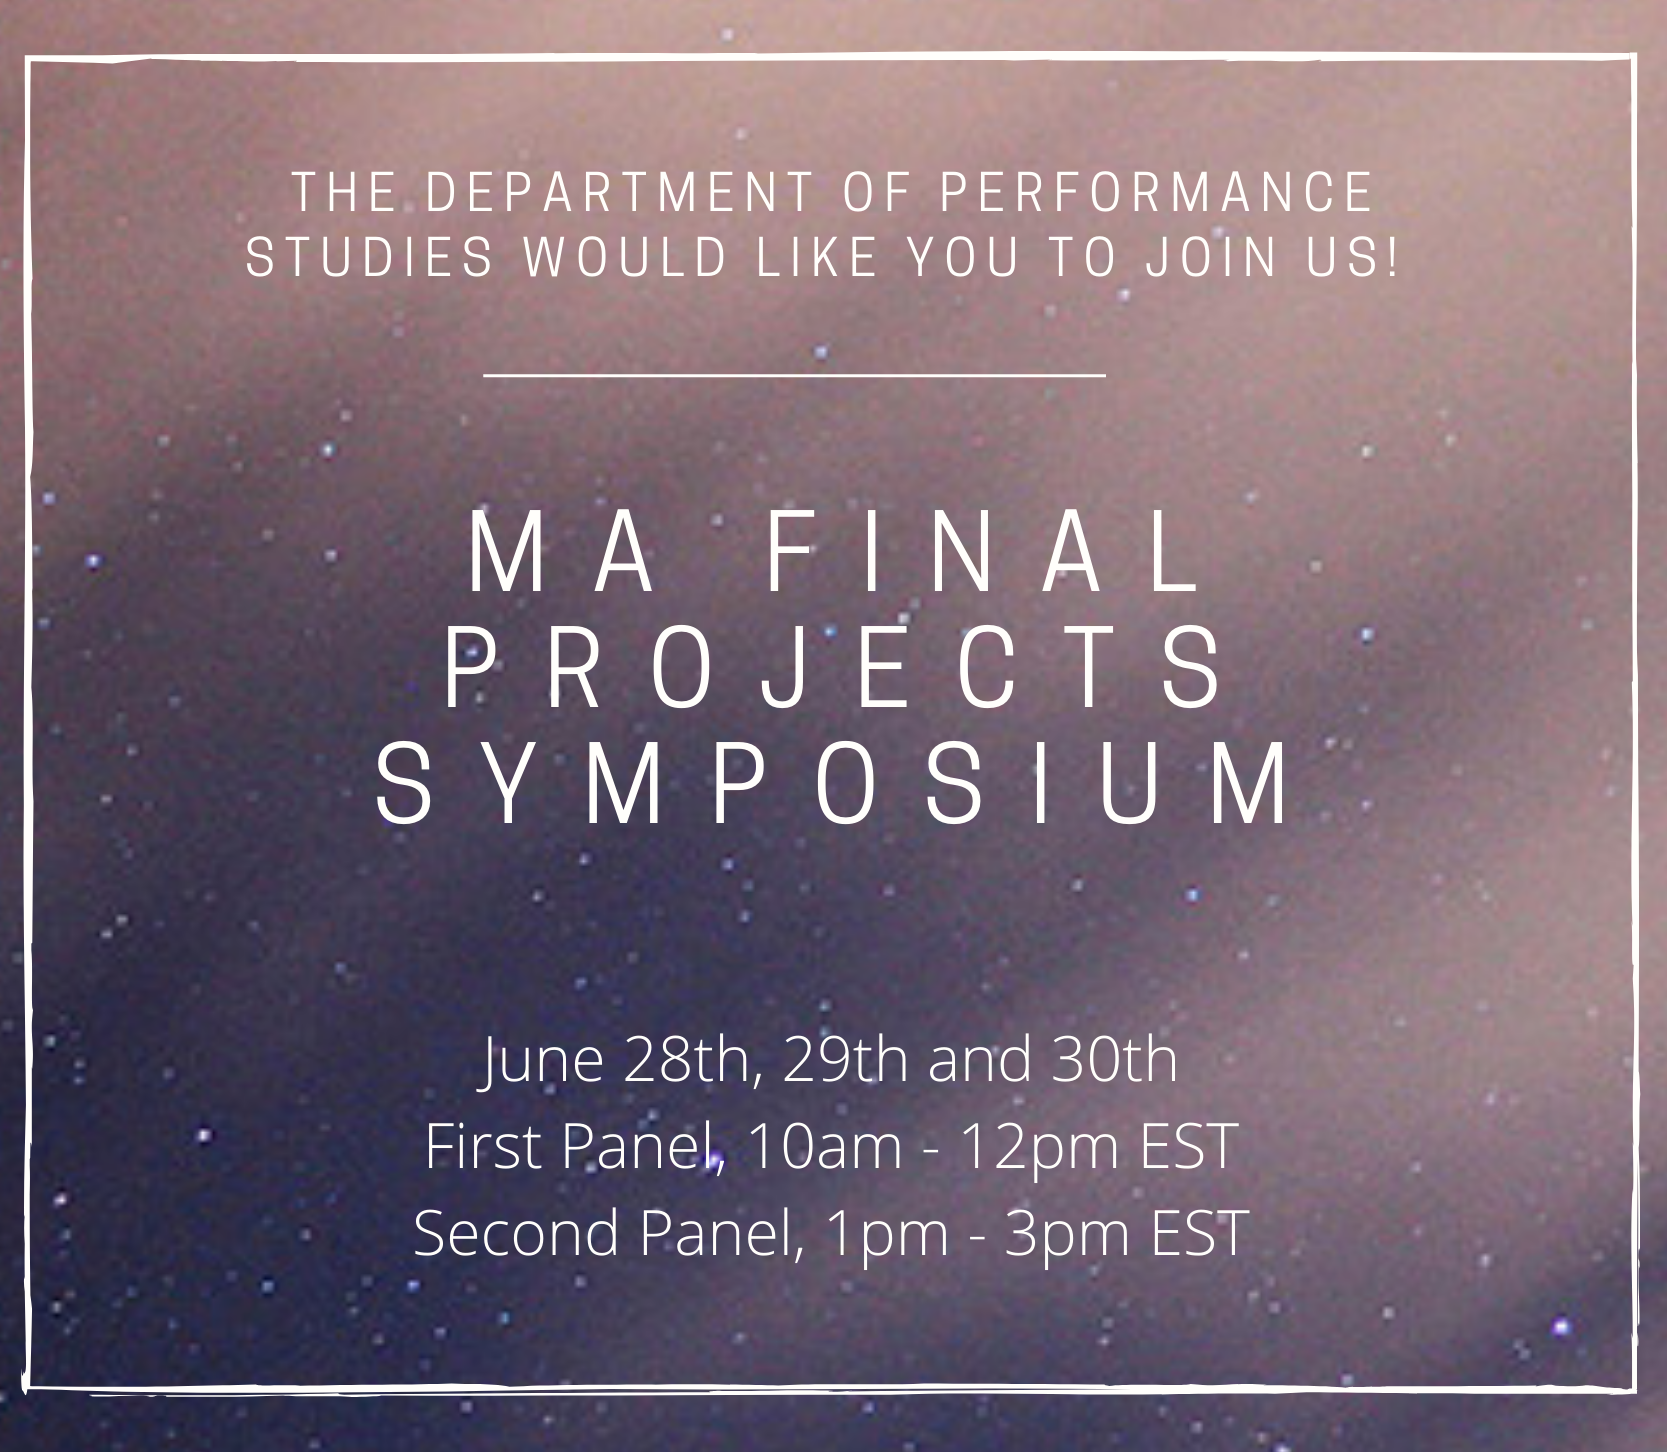 MA Final Projects Symposium